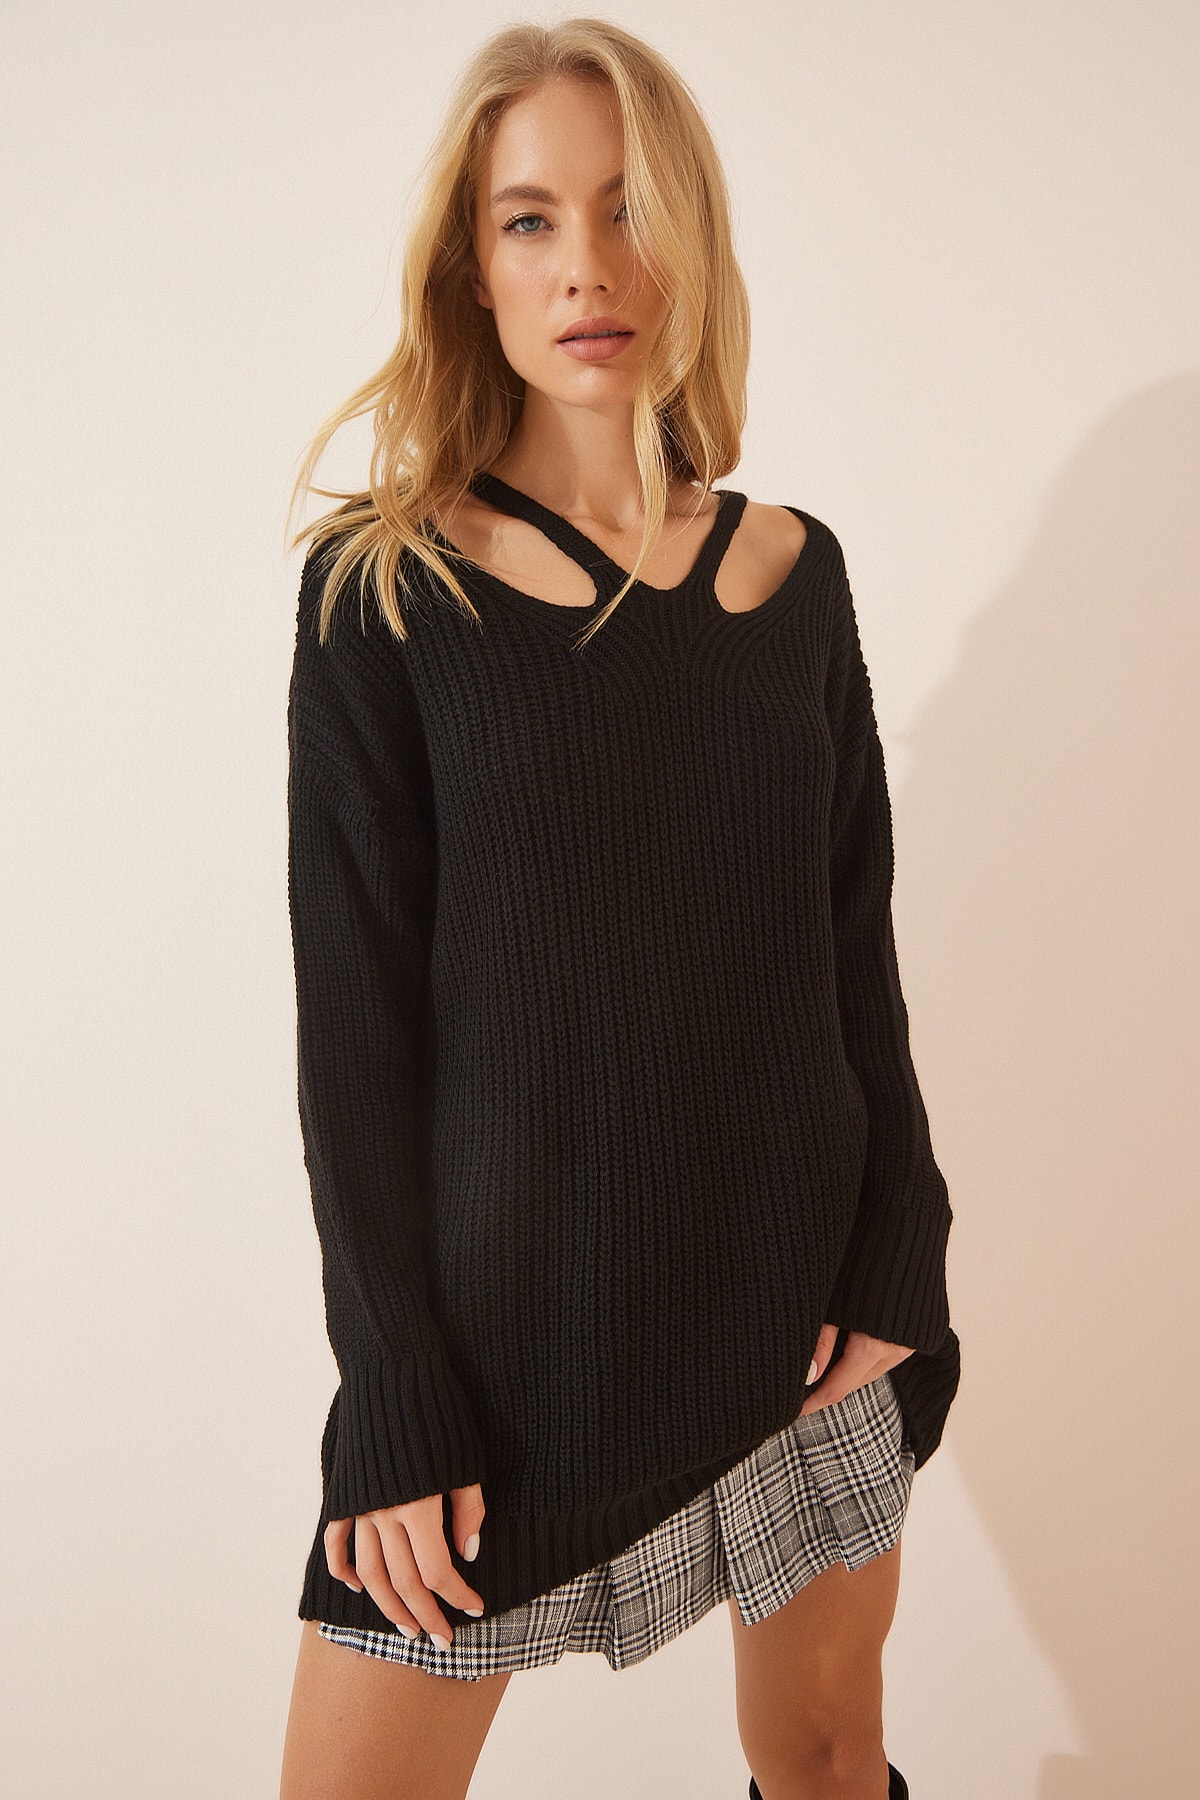 Happiness İstanbul Women's Black Cut Out Detailed Oversize Long Knitwear